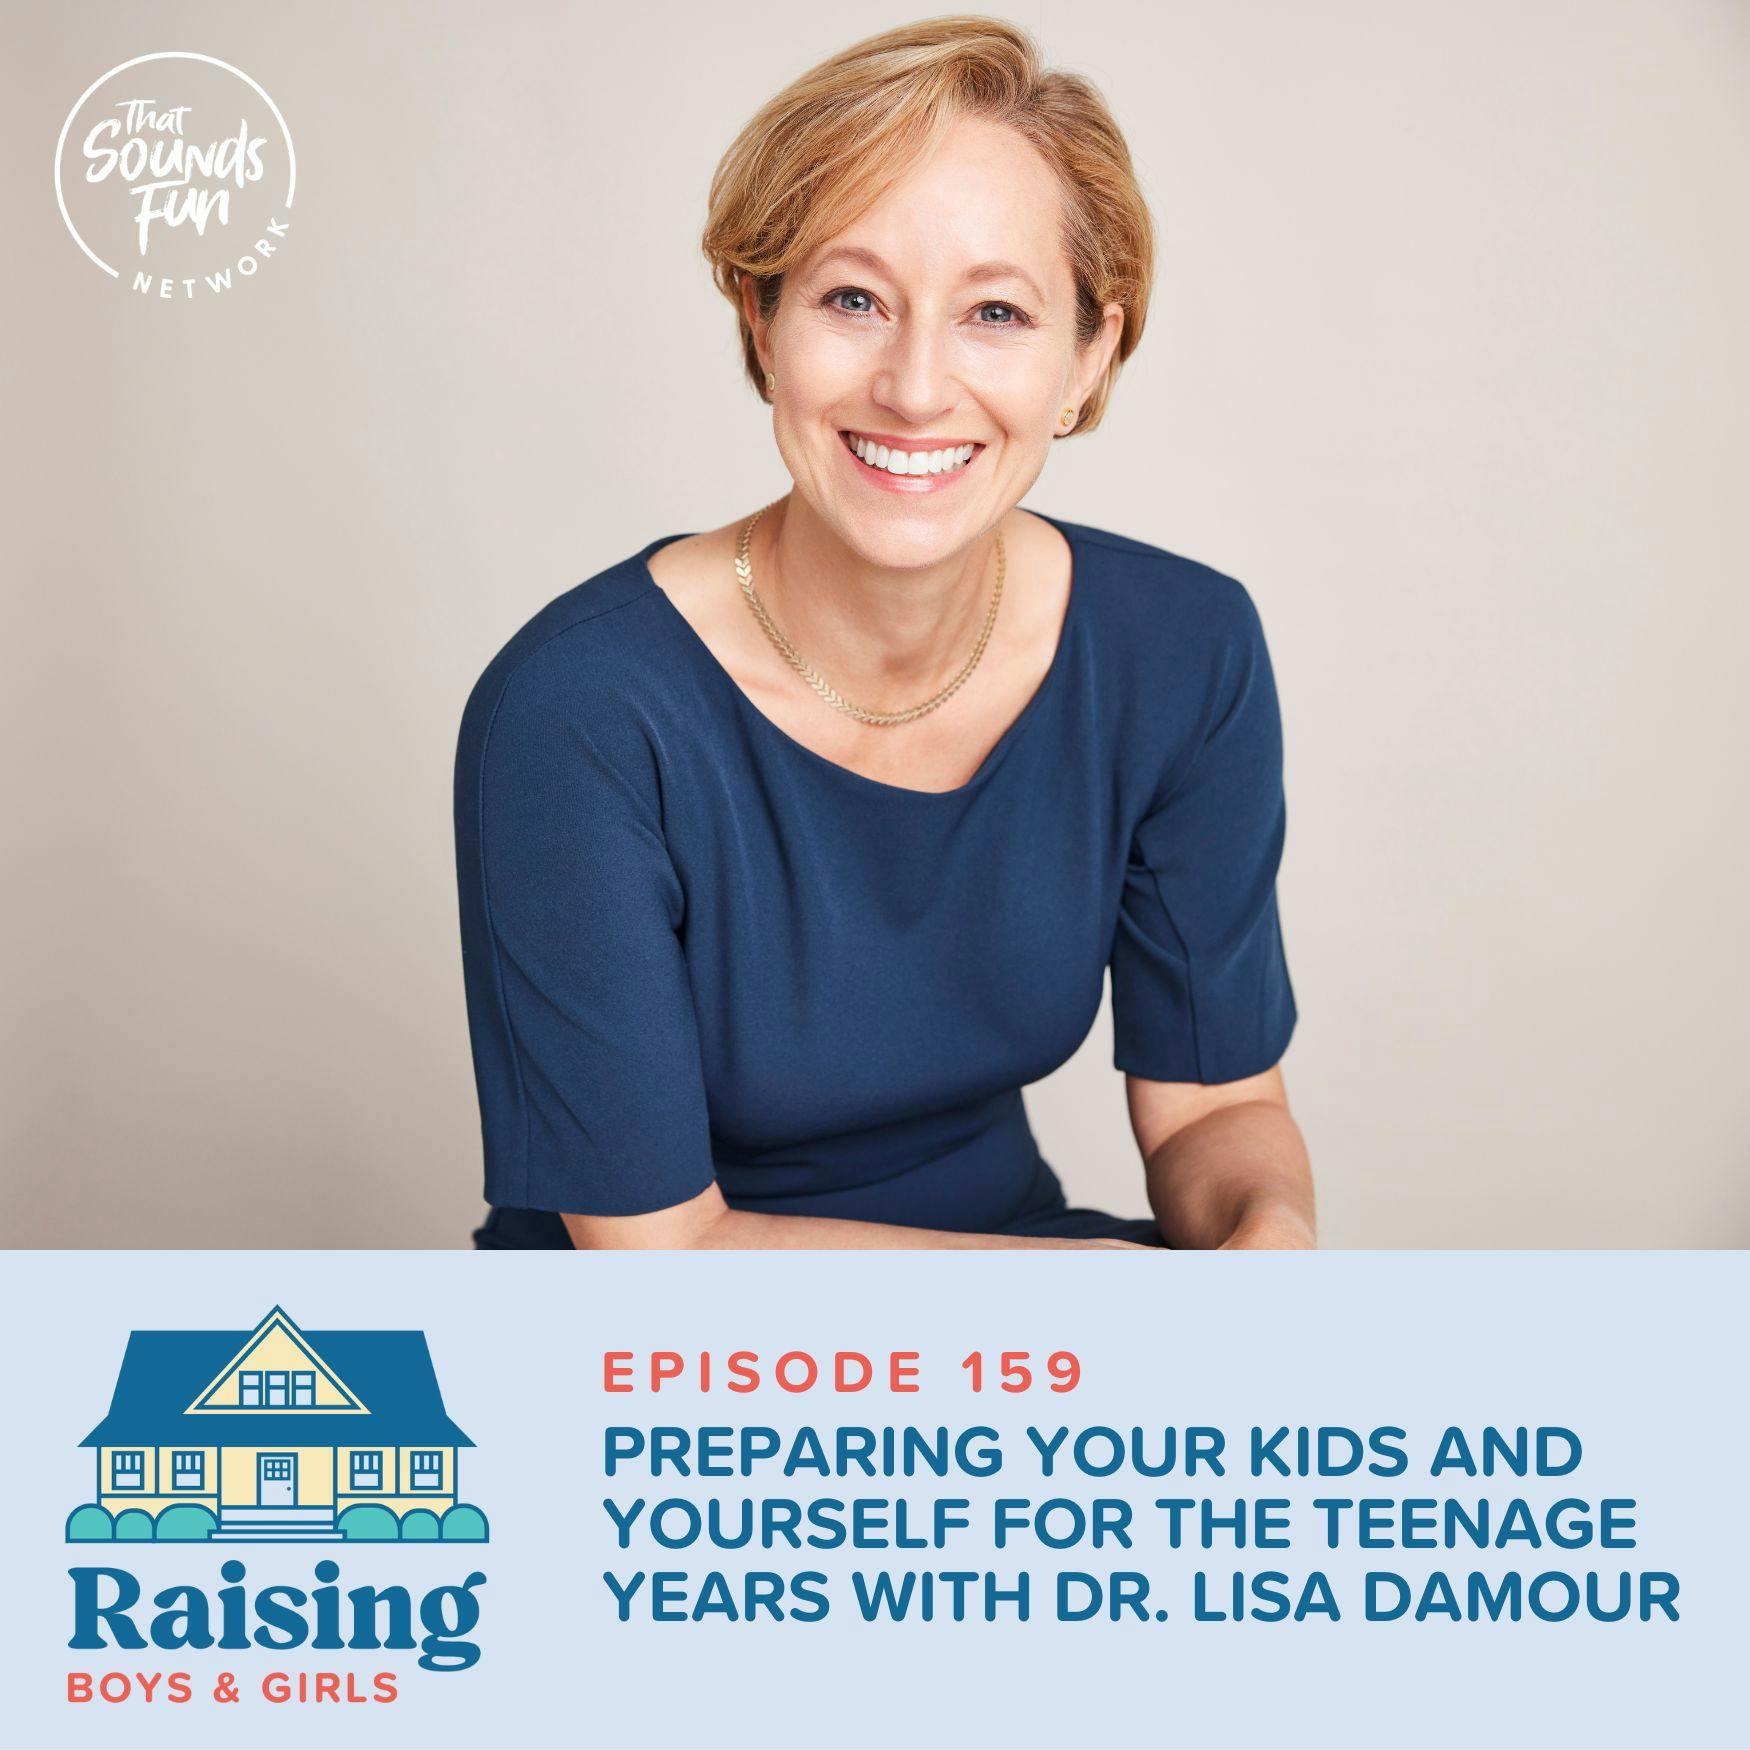 Episode 159: Preparing Your Kids and Yourself for the Teenage Years with Lisa Damour